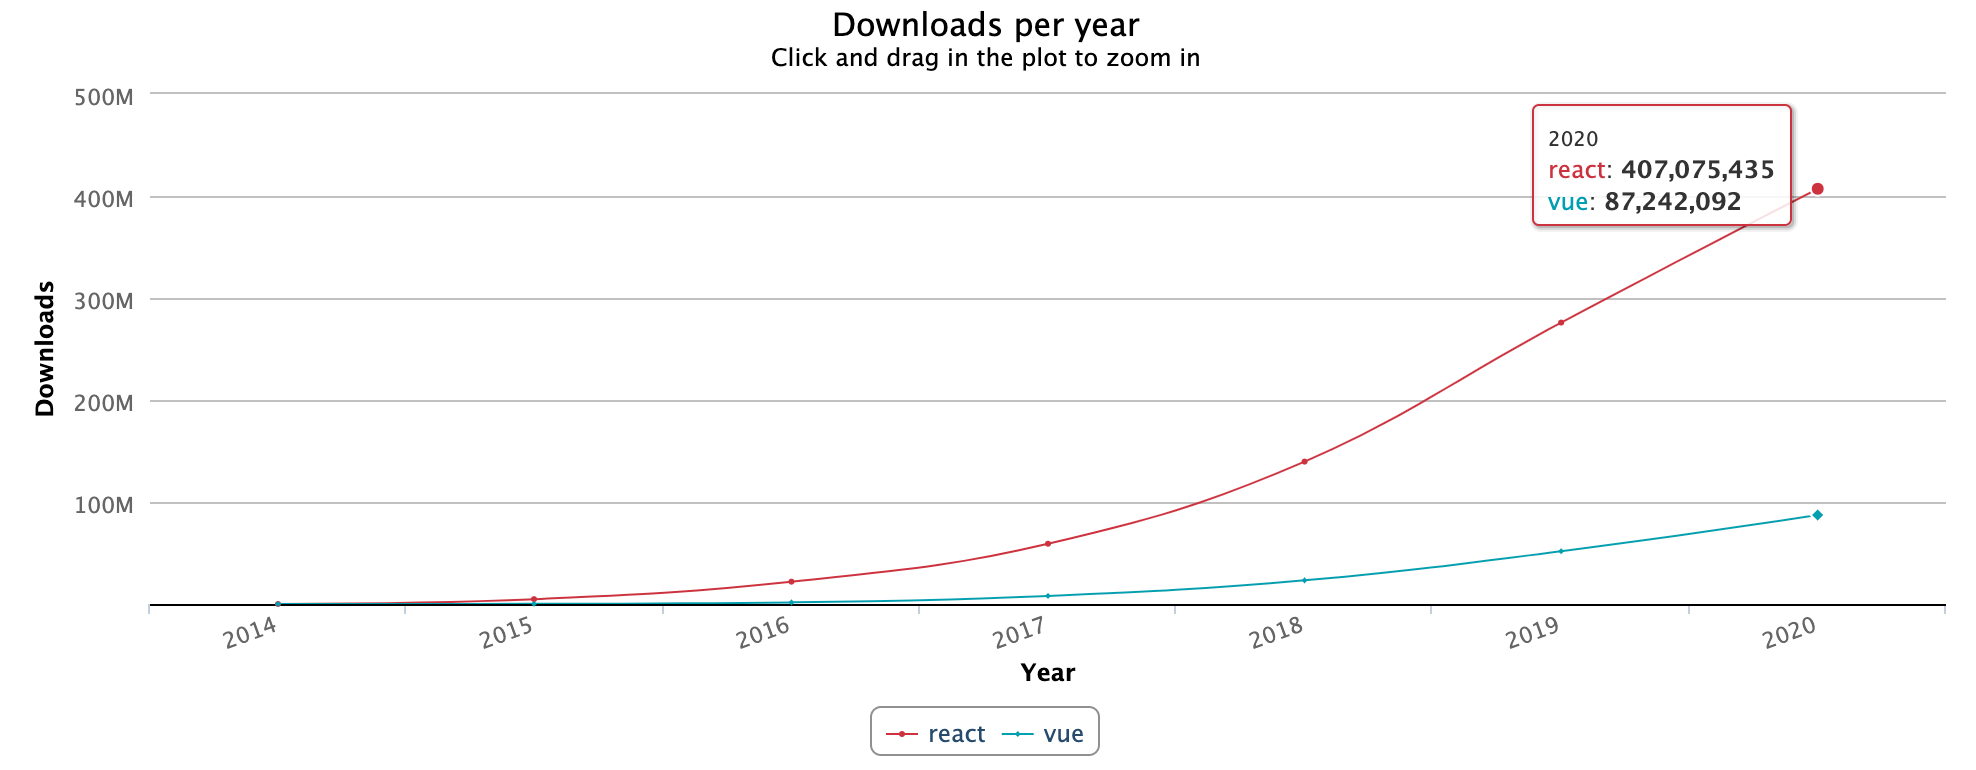 Number of npm downloads of Vue.js compared to React